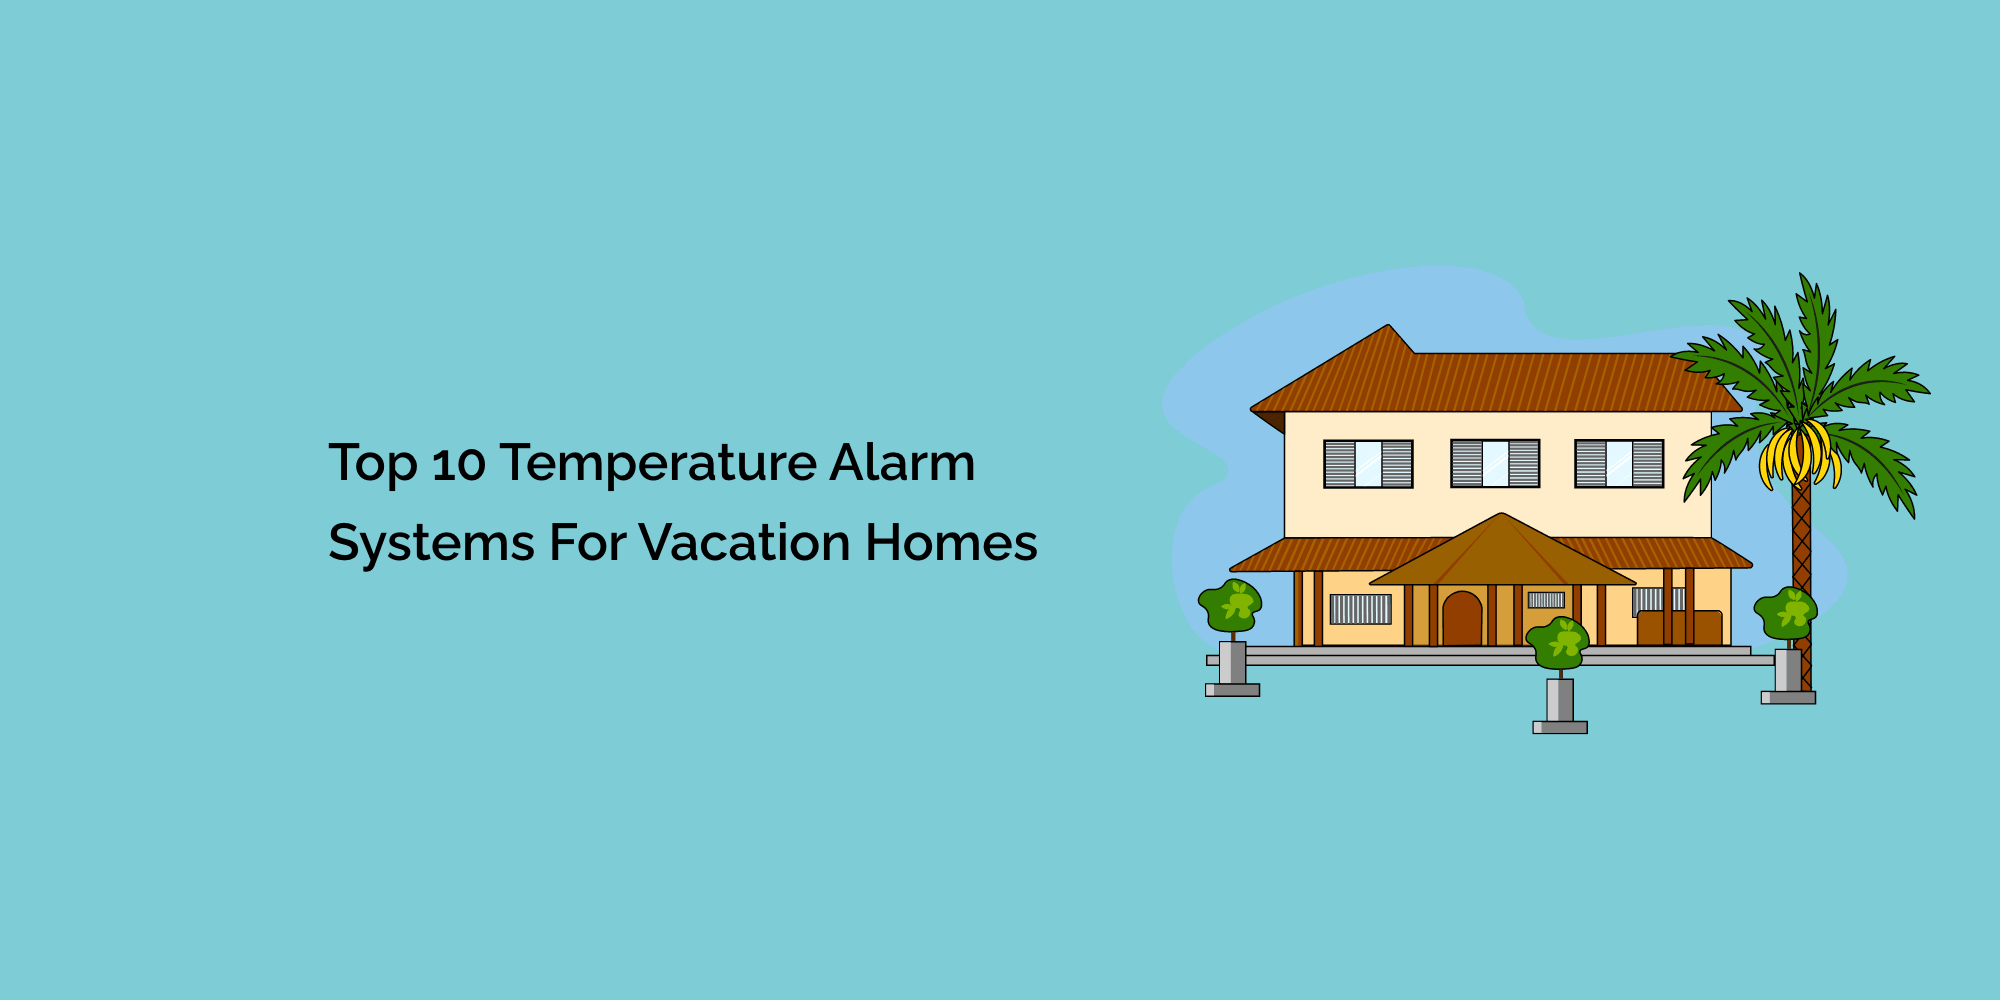 Top 10 Temperature Alarm Systems for Vacation Homes